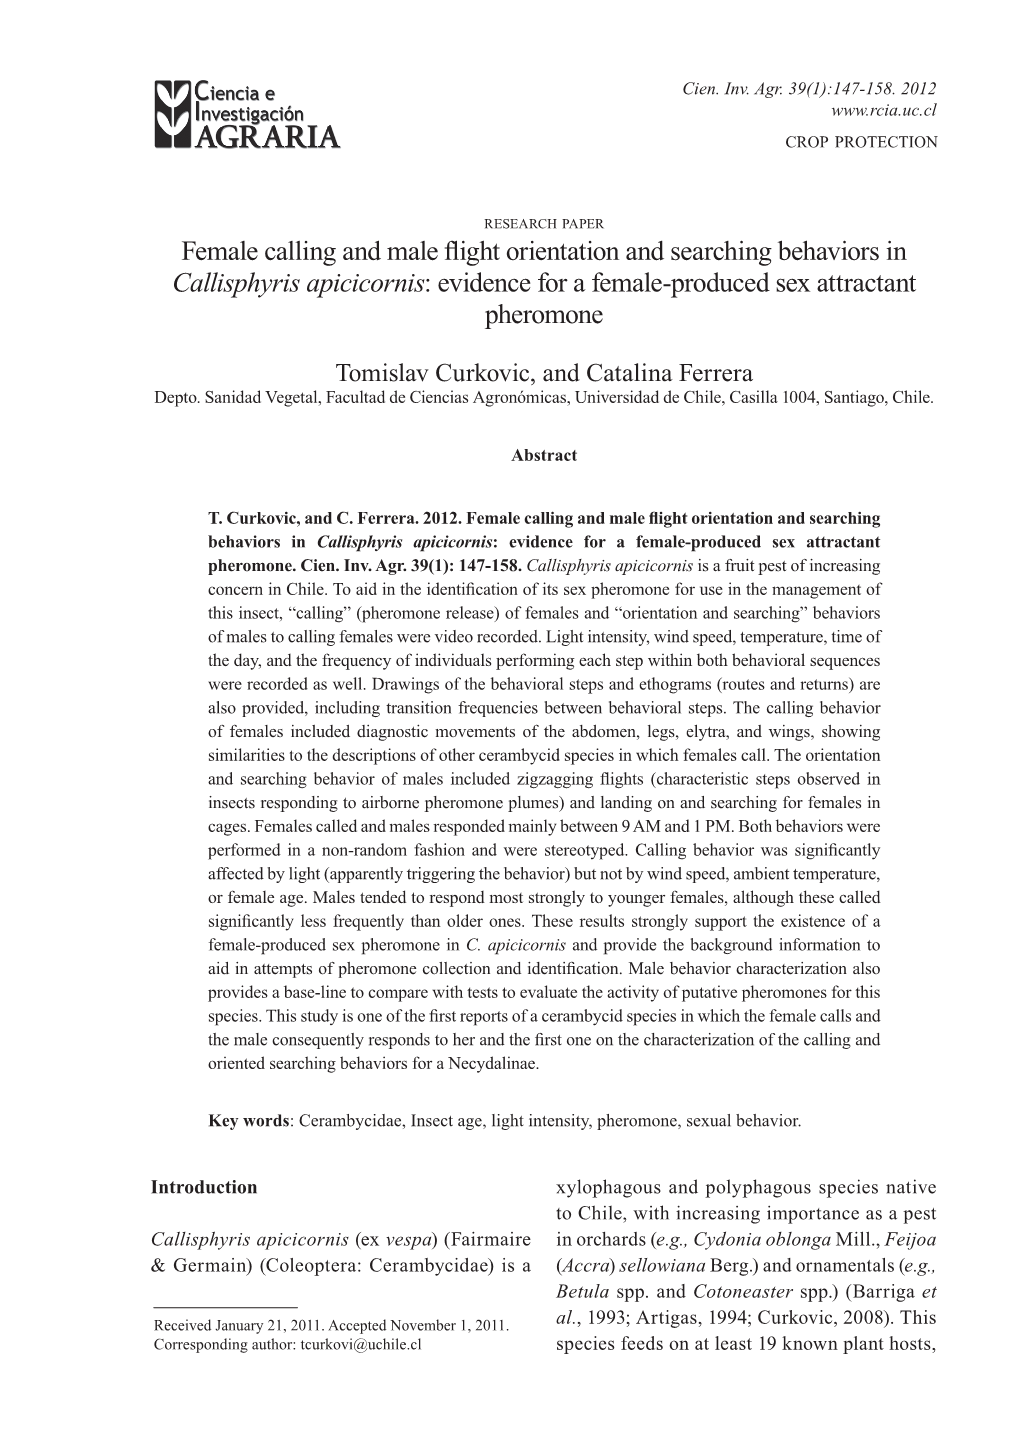 Female Calling and Male Flight Orientation and Searching Behaviors in Callisphyris Apicicornis: Evidence for a Female-Produced Sex Attractant Pheromone